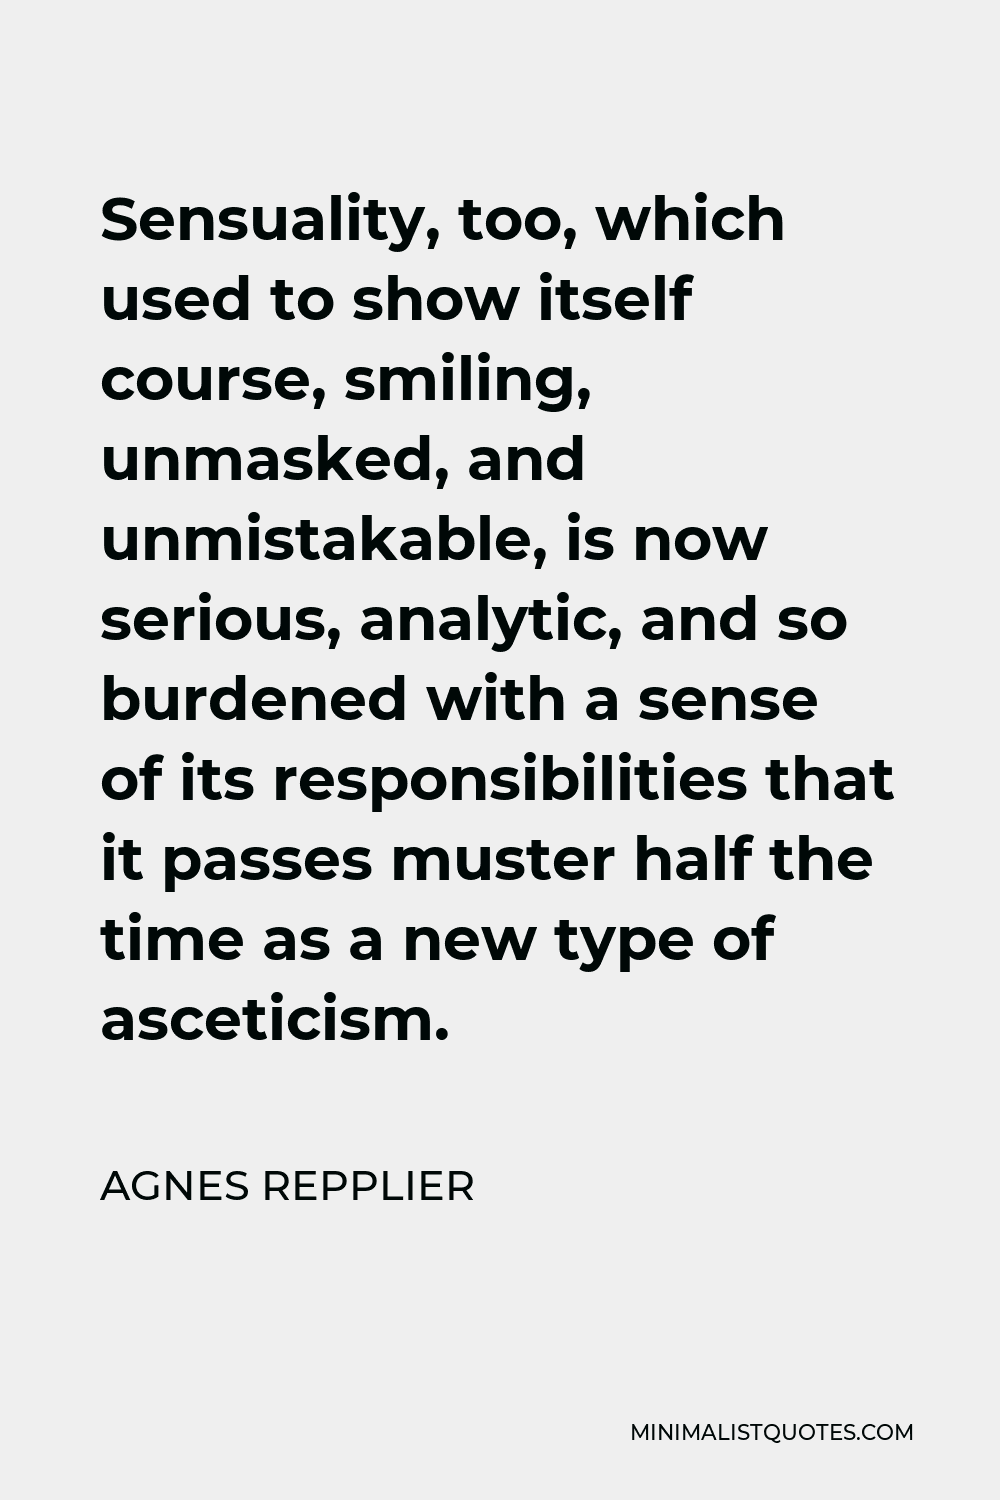 Agnes Repplier Quote - Sensuality, too, which used to show itself course, smiling, unmasked, and unmistakable, is now serious, analytic, and so burdened with a sense of its responsibilities that it passes muster half the time as a new type of asceticism.